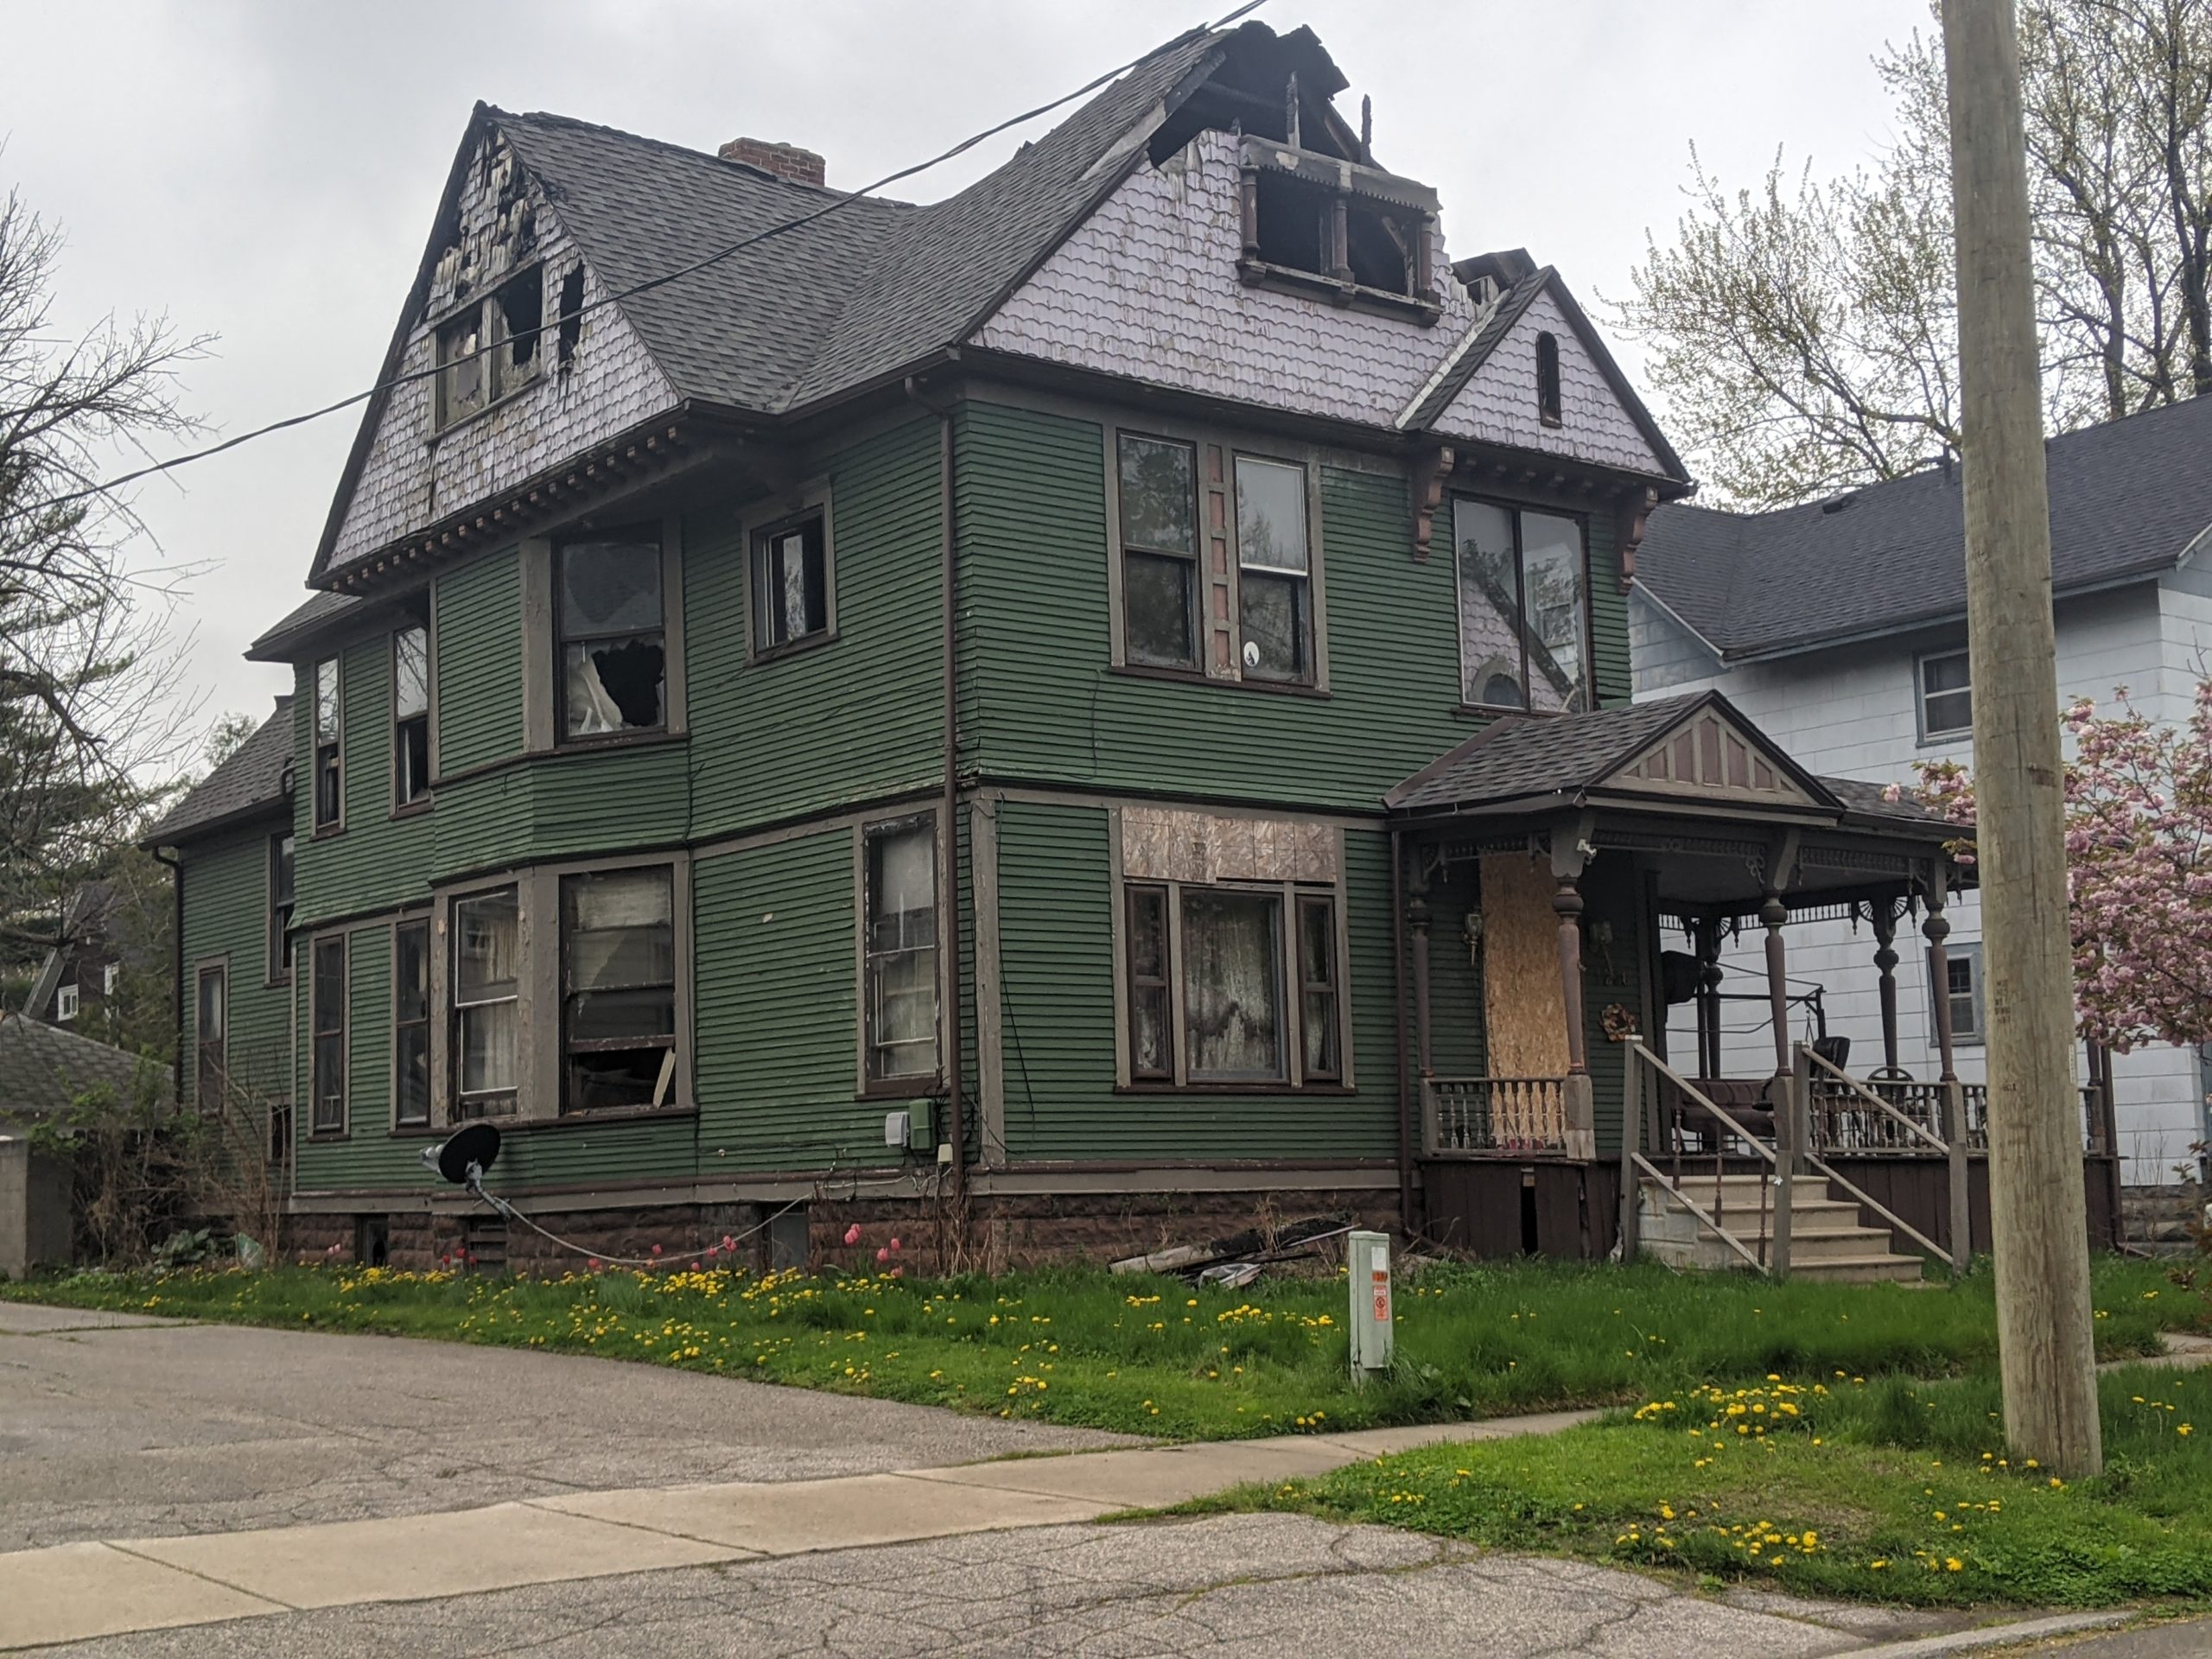 An abandoned, deteriorated home in Bay City, MI. Photo by: Janell O'Keefe